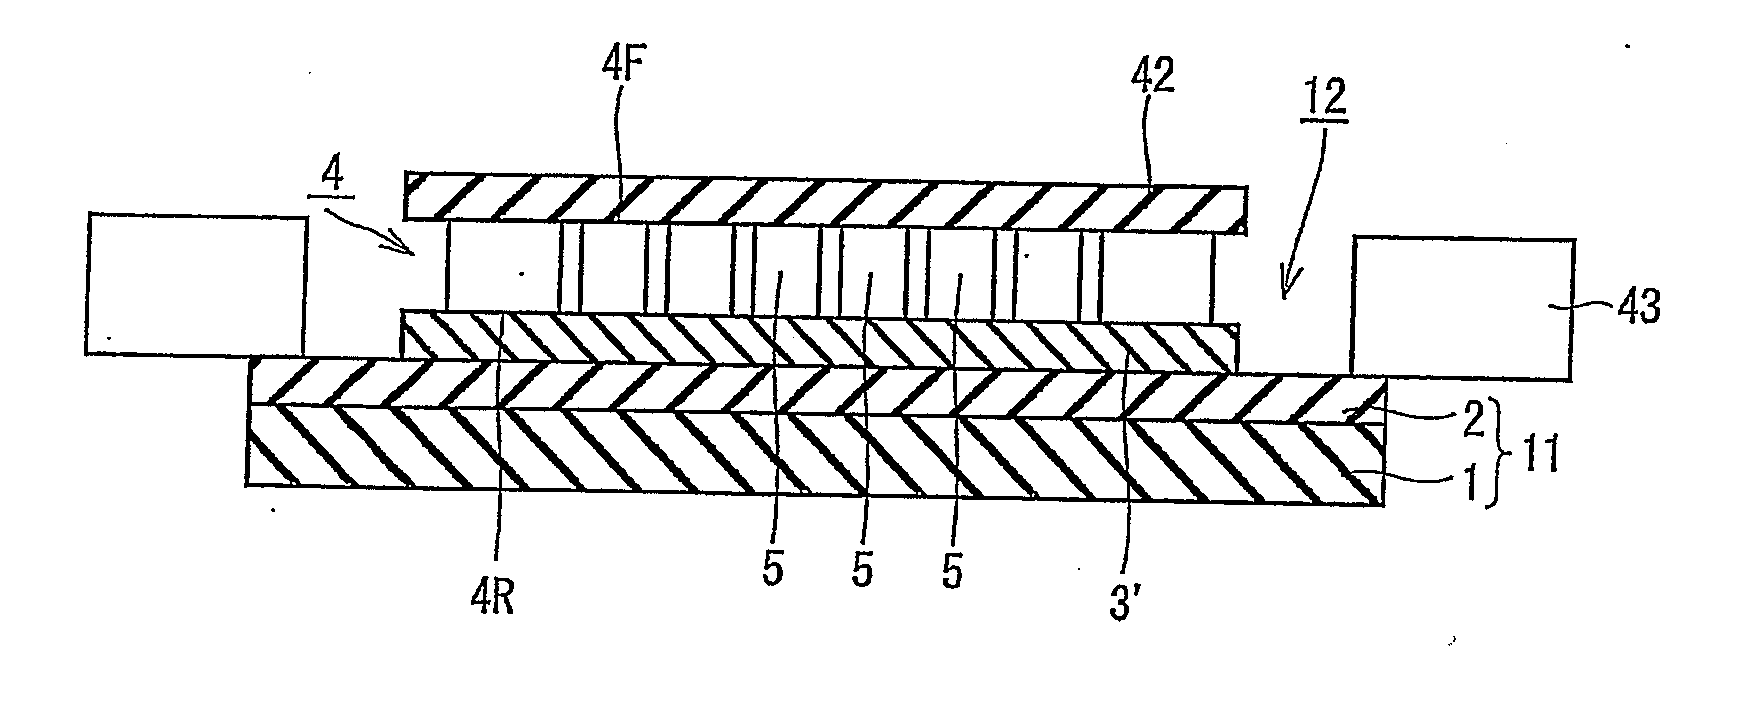 Thermosetting die bond film, dicing die bond film and semiconductor device